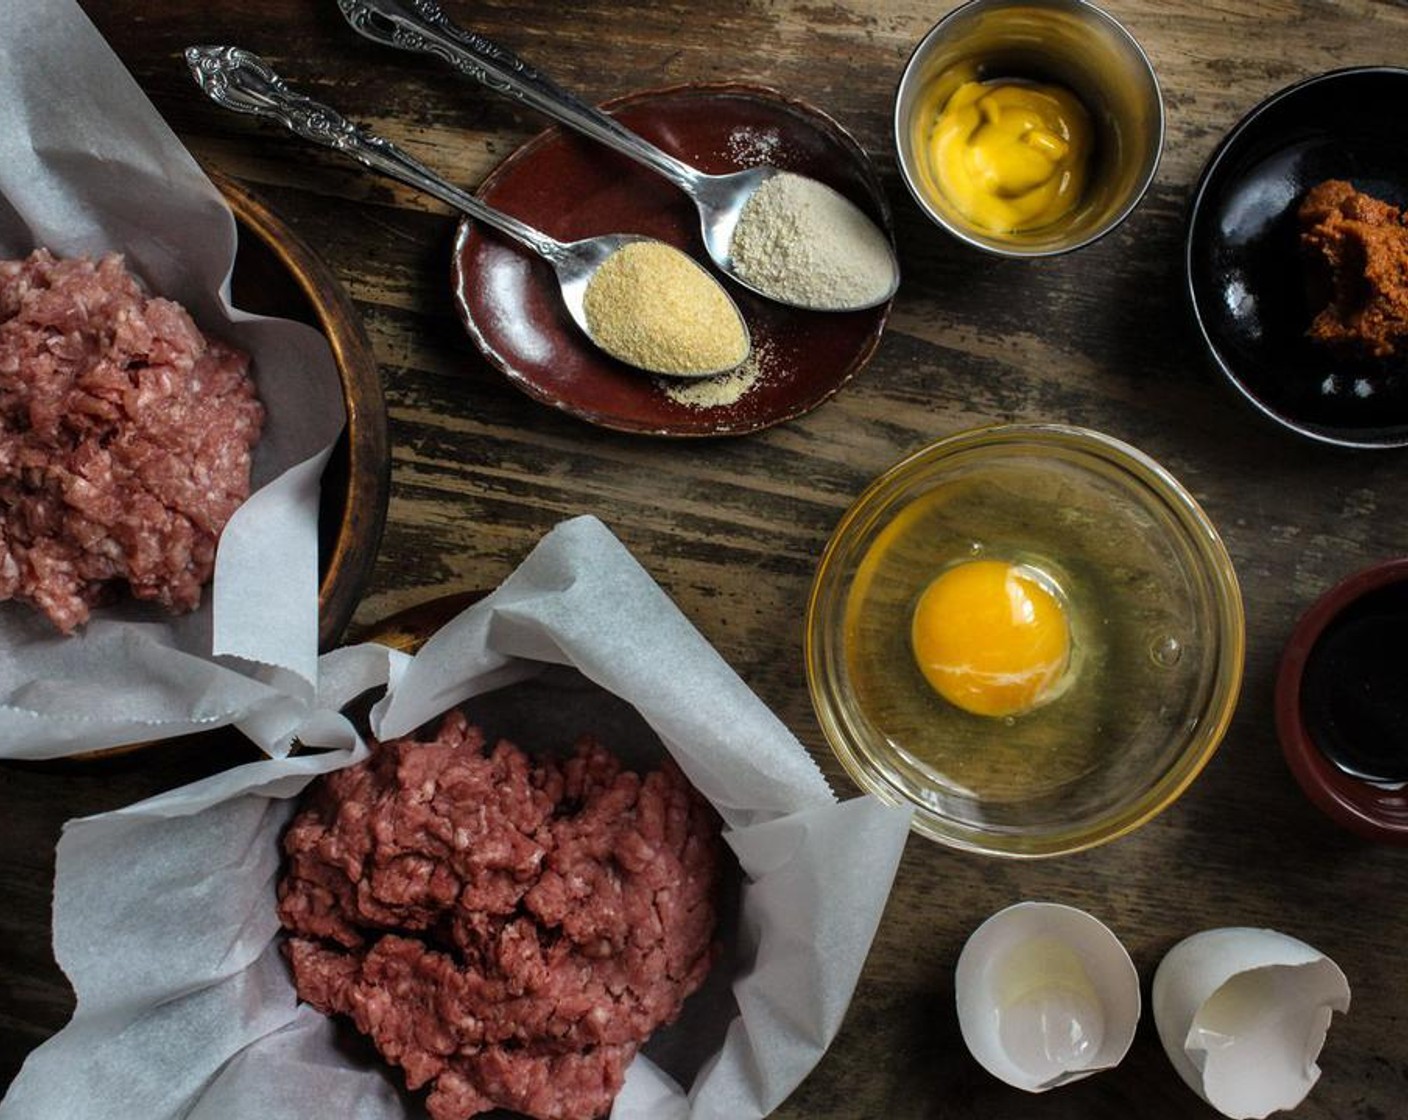 step 1 In a bowl, combine the Ground Beef (9 oz), Ground Pork (9 oz), Yellow Mustard (1 Tbsp), Egg (1), Worcestershire Sauce (1/4 tsp), Miso Paste (1 1/2 Tbsp), McCormick® Garlic Powder (1 tsp), and Onion Powder (1 tsp), and mix.